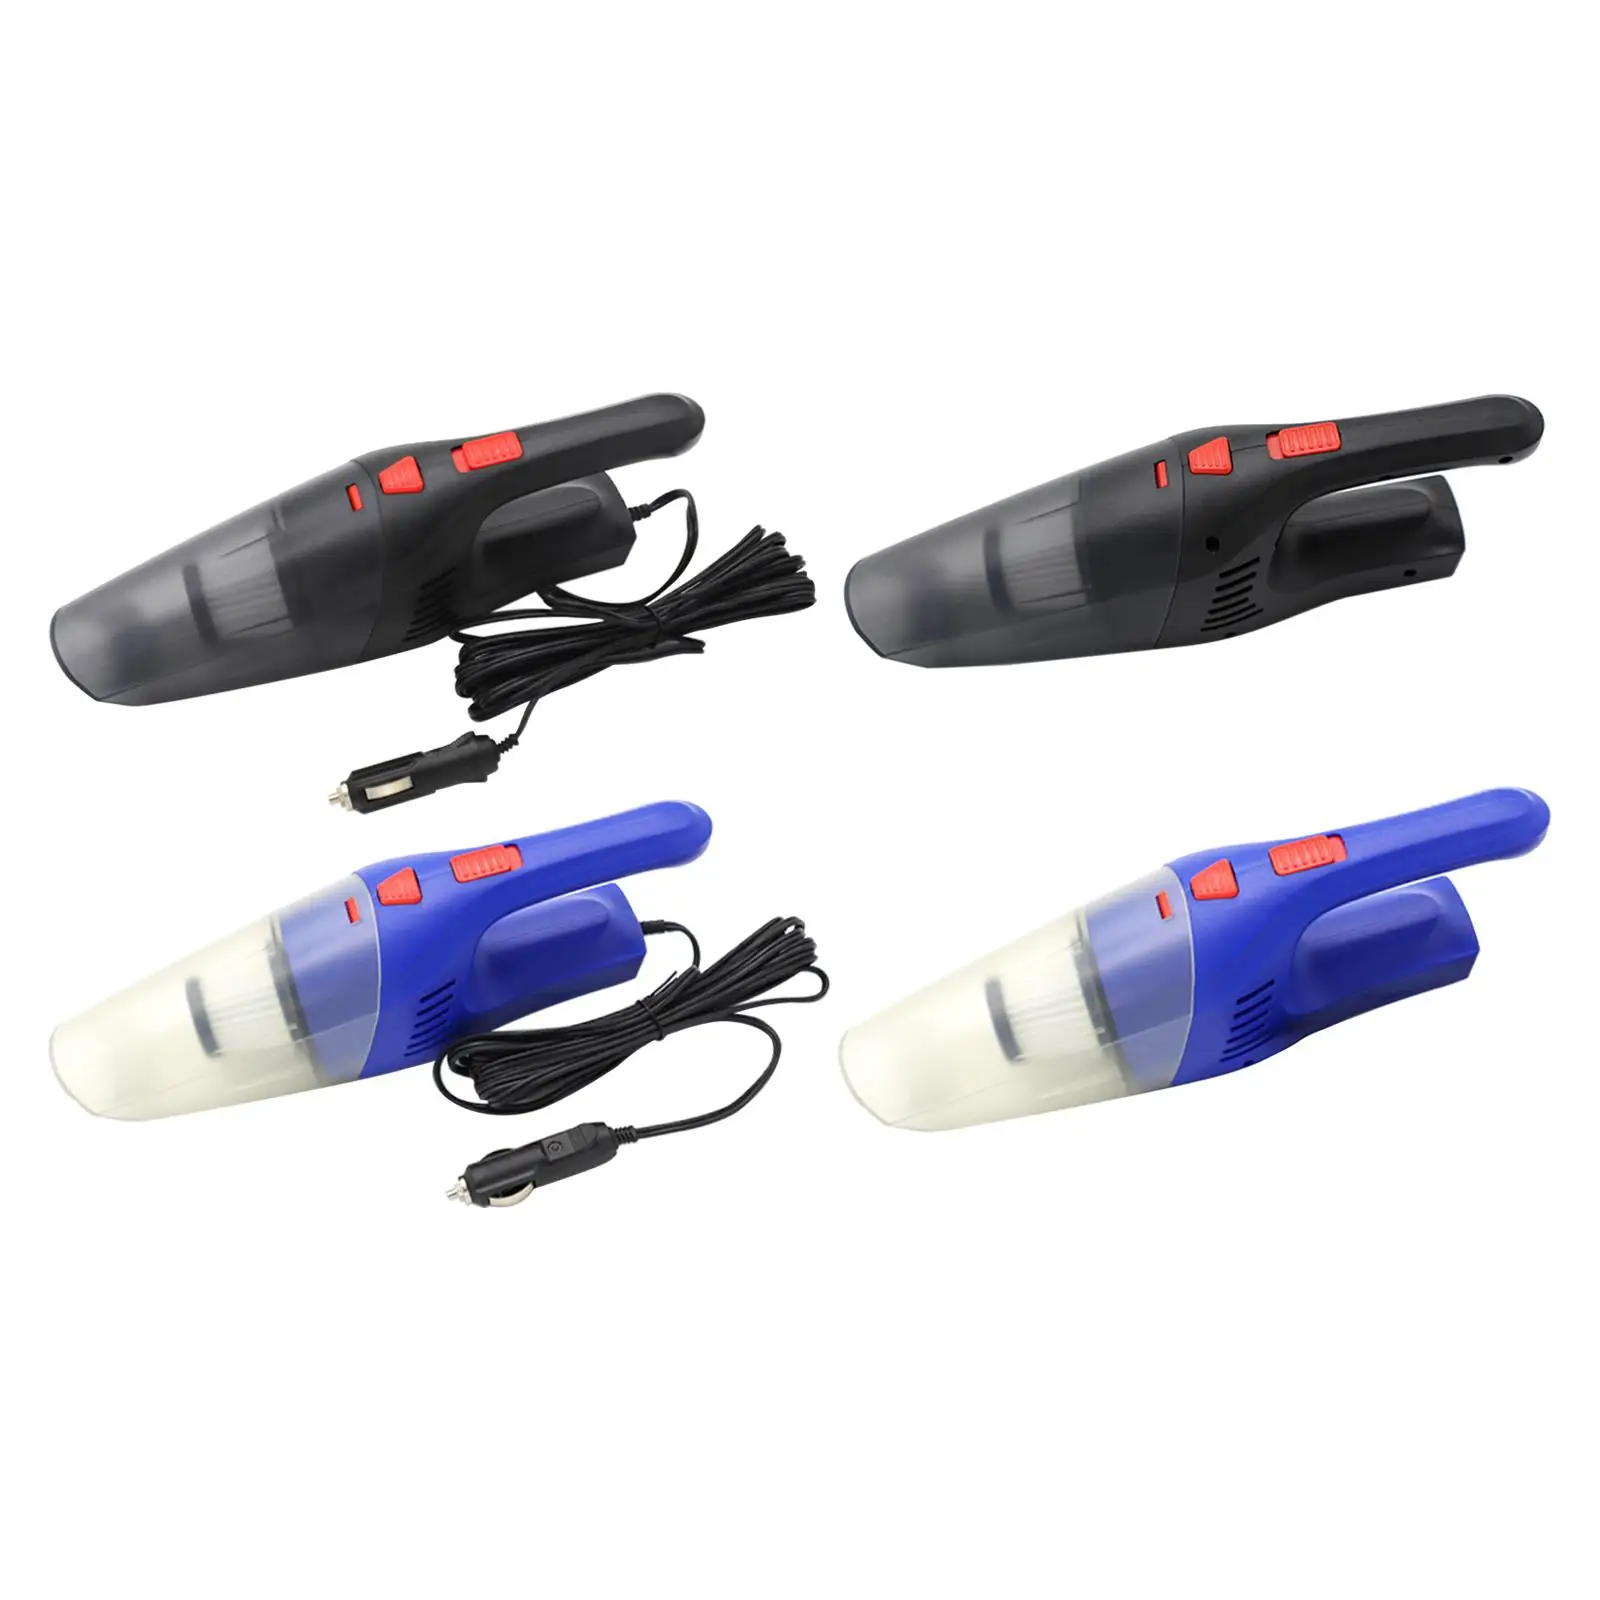 Handheld Car Vacuum Cleaner 6000PA Vacuum Cleaning Portable Fit for Home